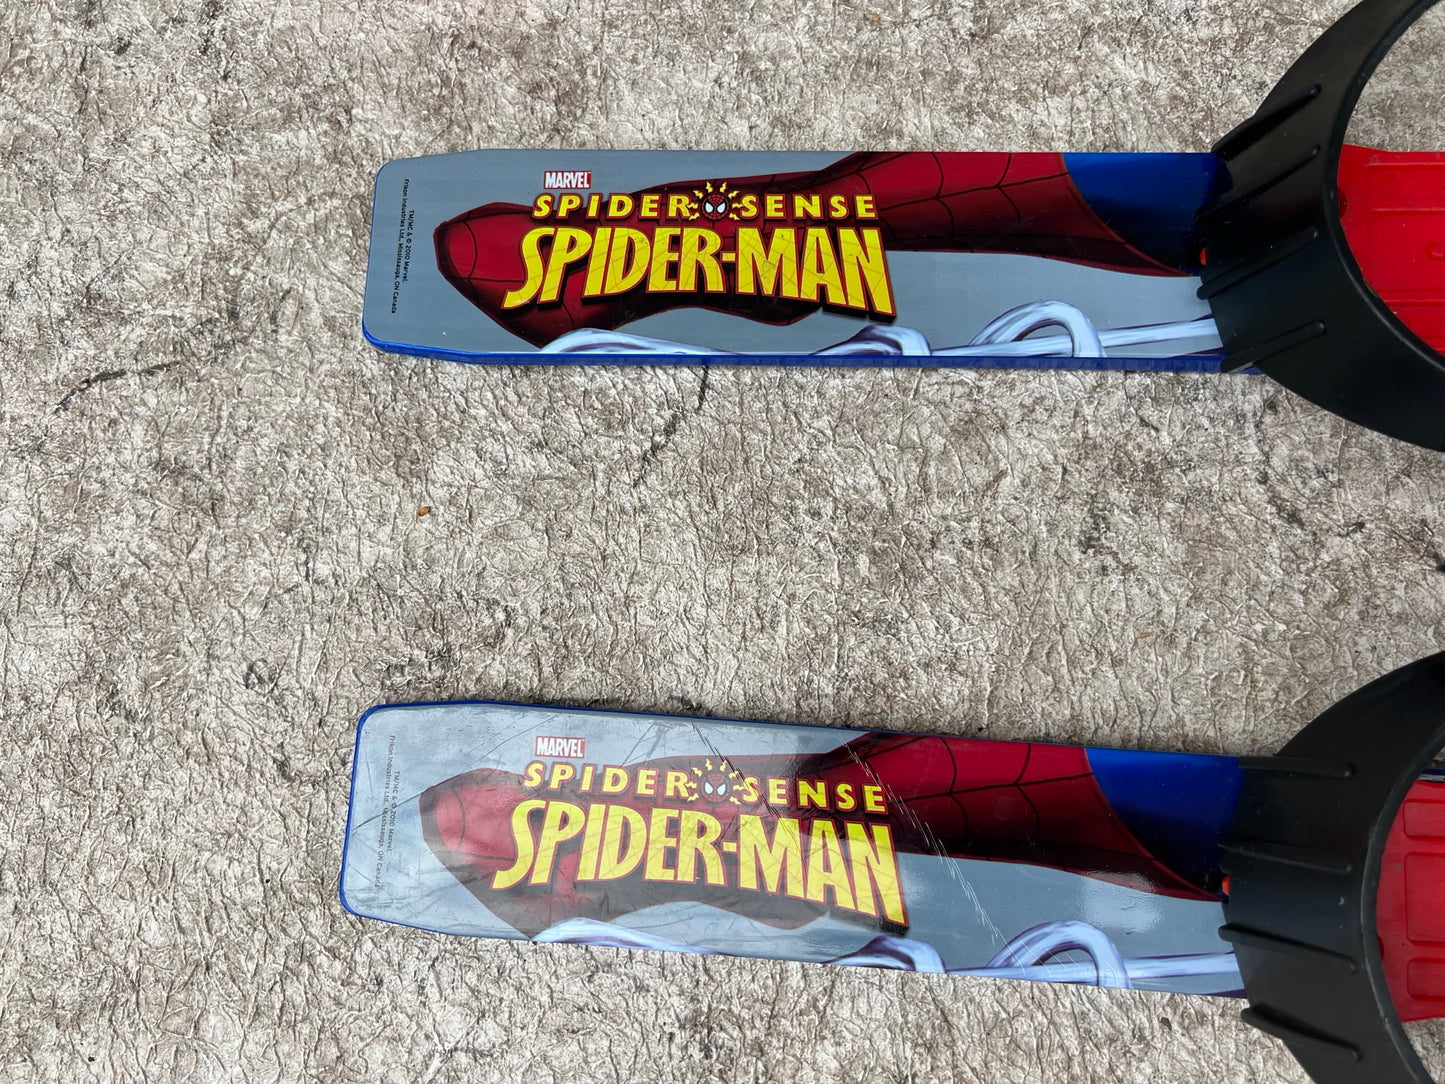 Ski 063 Toddler Plastic My First Ski Poles With Bindings Spiderman Plastic  Wear With Winter Boots